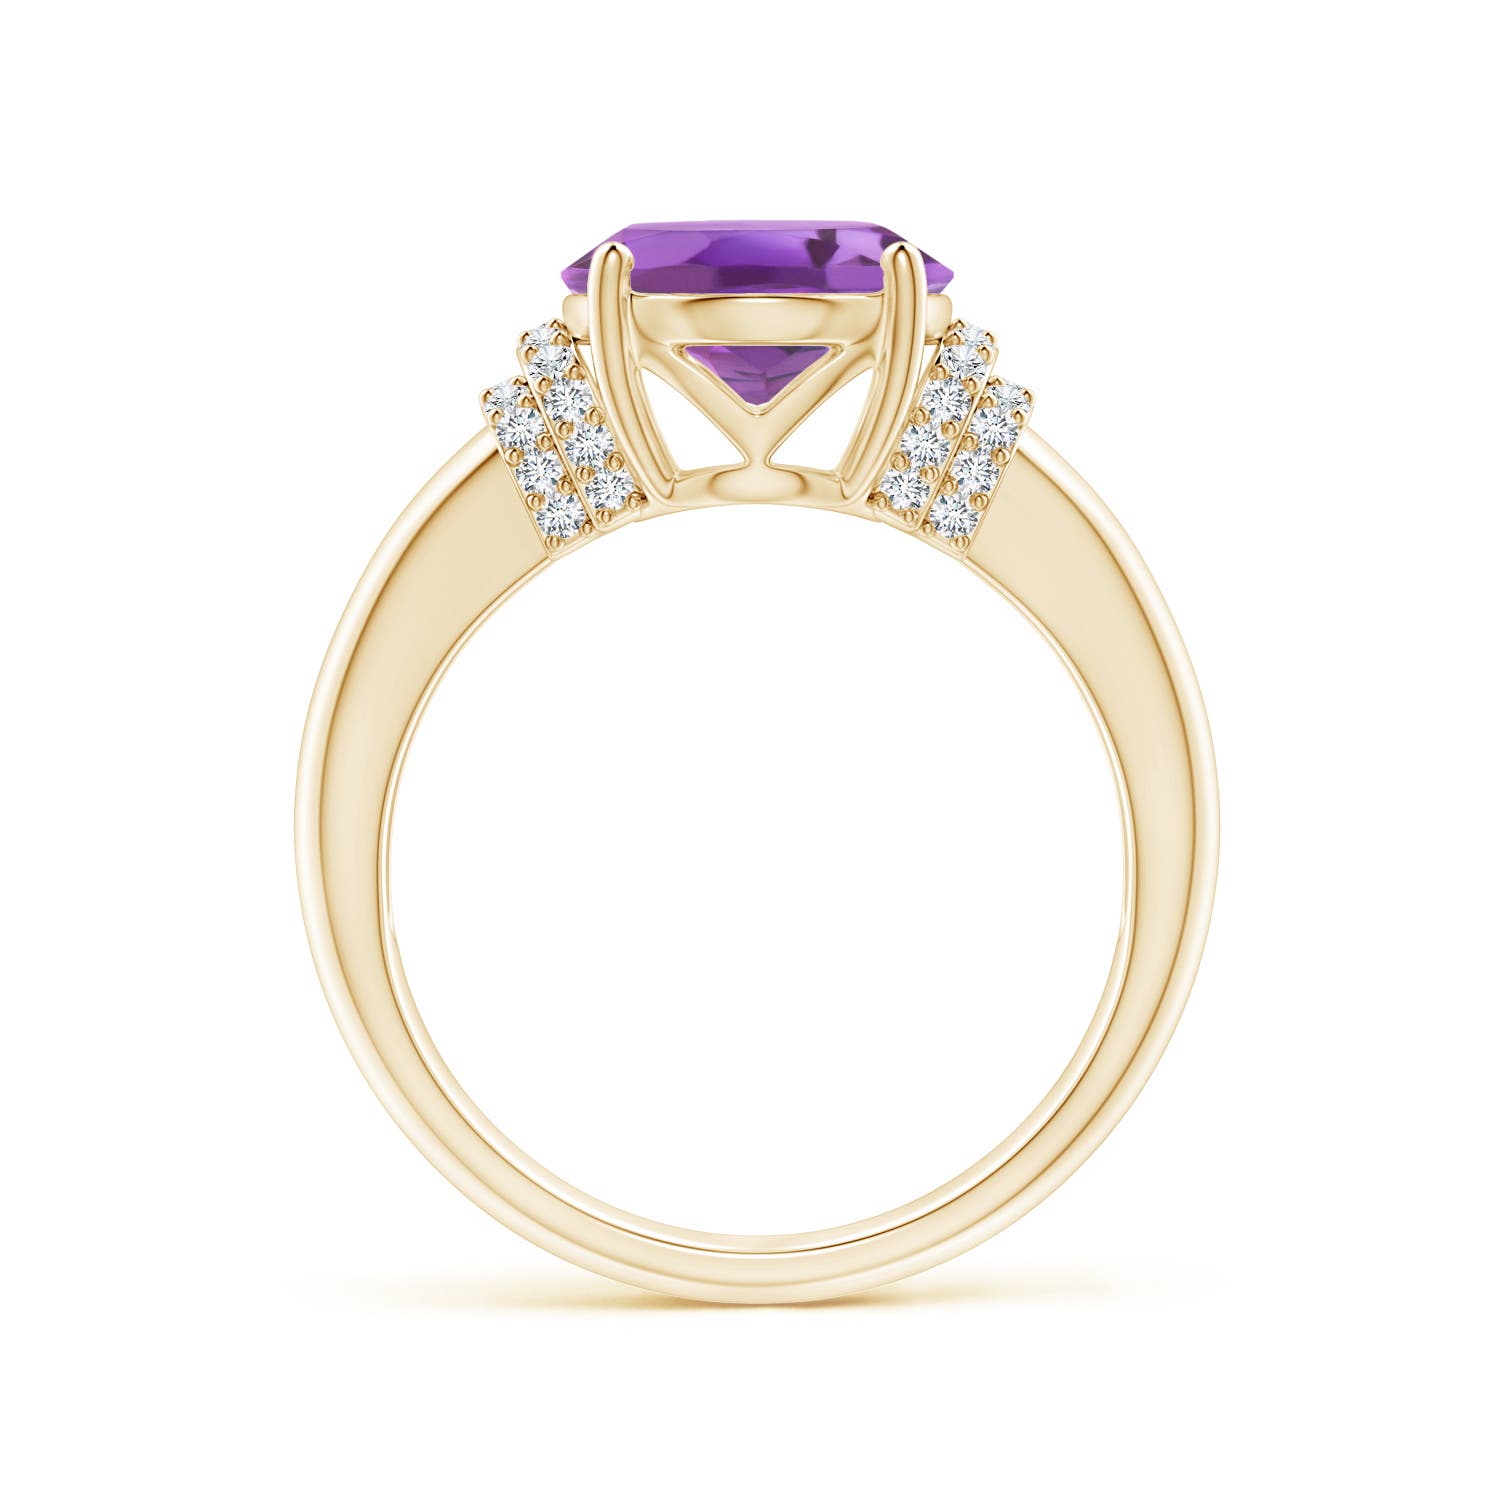 A - Amethyst / 3.35 CT / 14 KT Yellow Gold